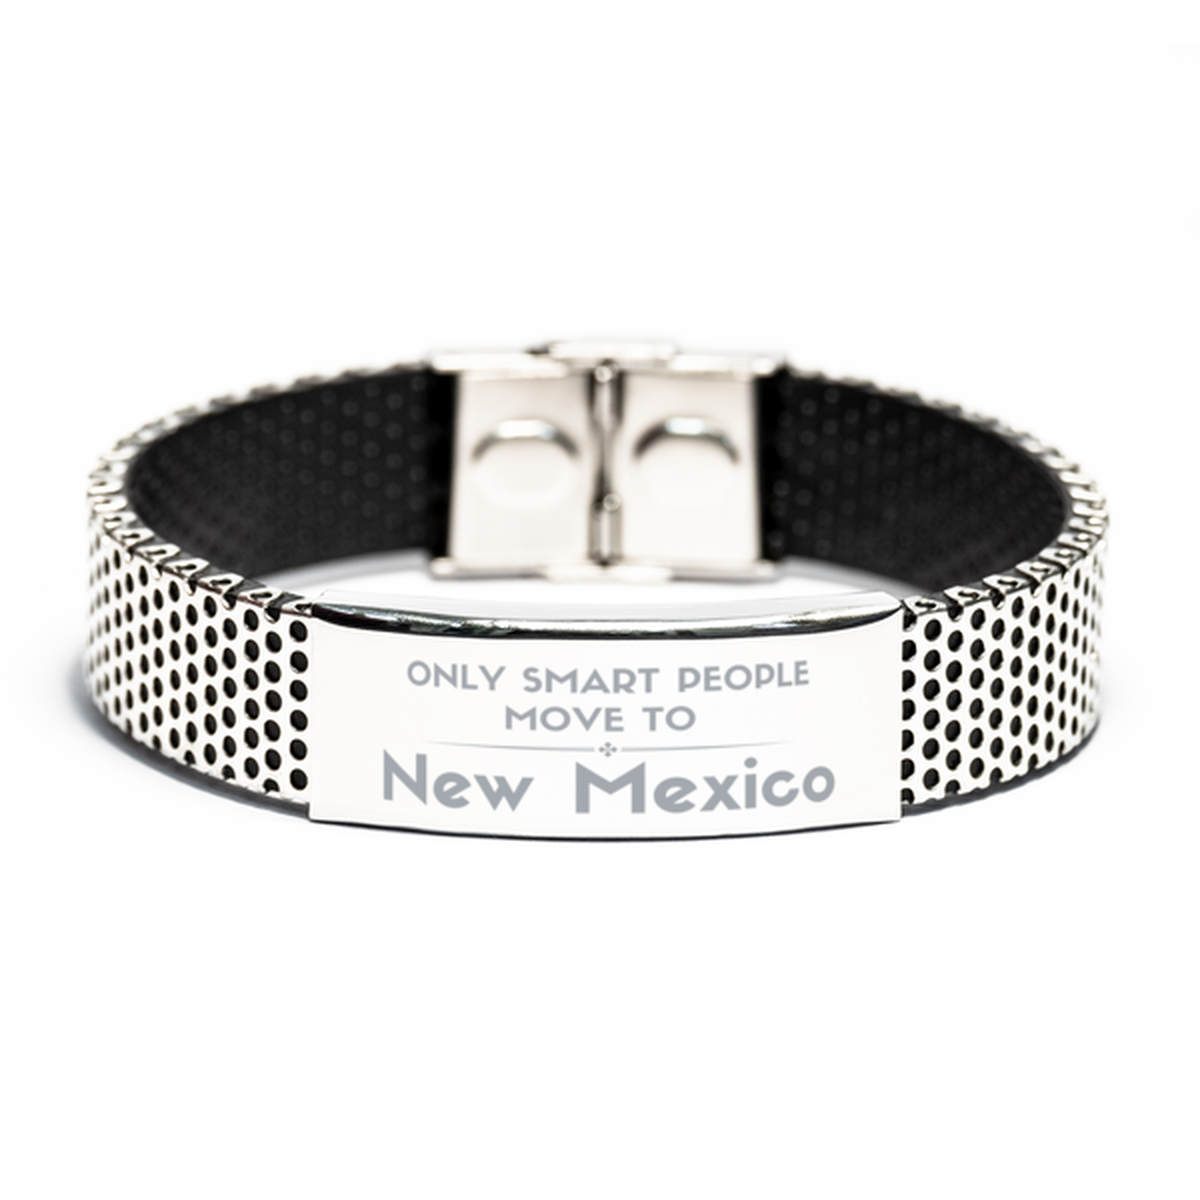 Only smart people move to New Mexico Stainless Steel Bracelet, Gag Gifts For New Mexico, Move to New Mexico Gifts for Friends Coworker Funny Saying Quote